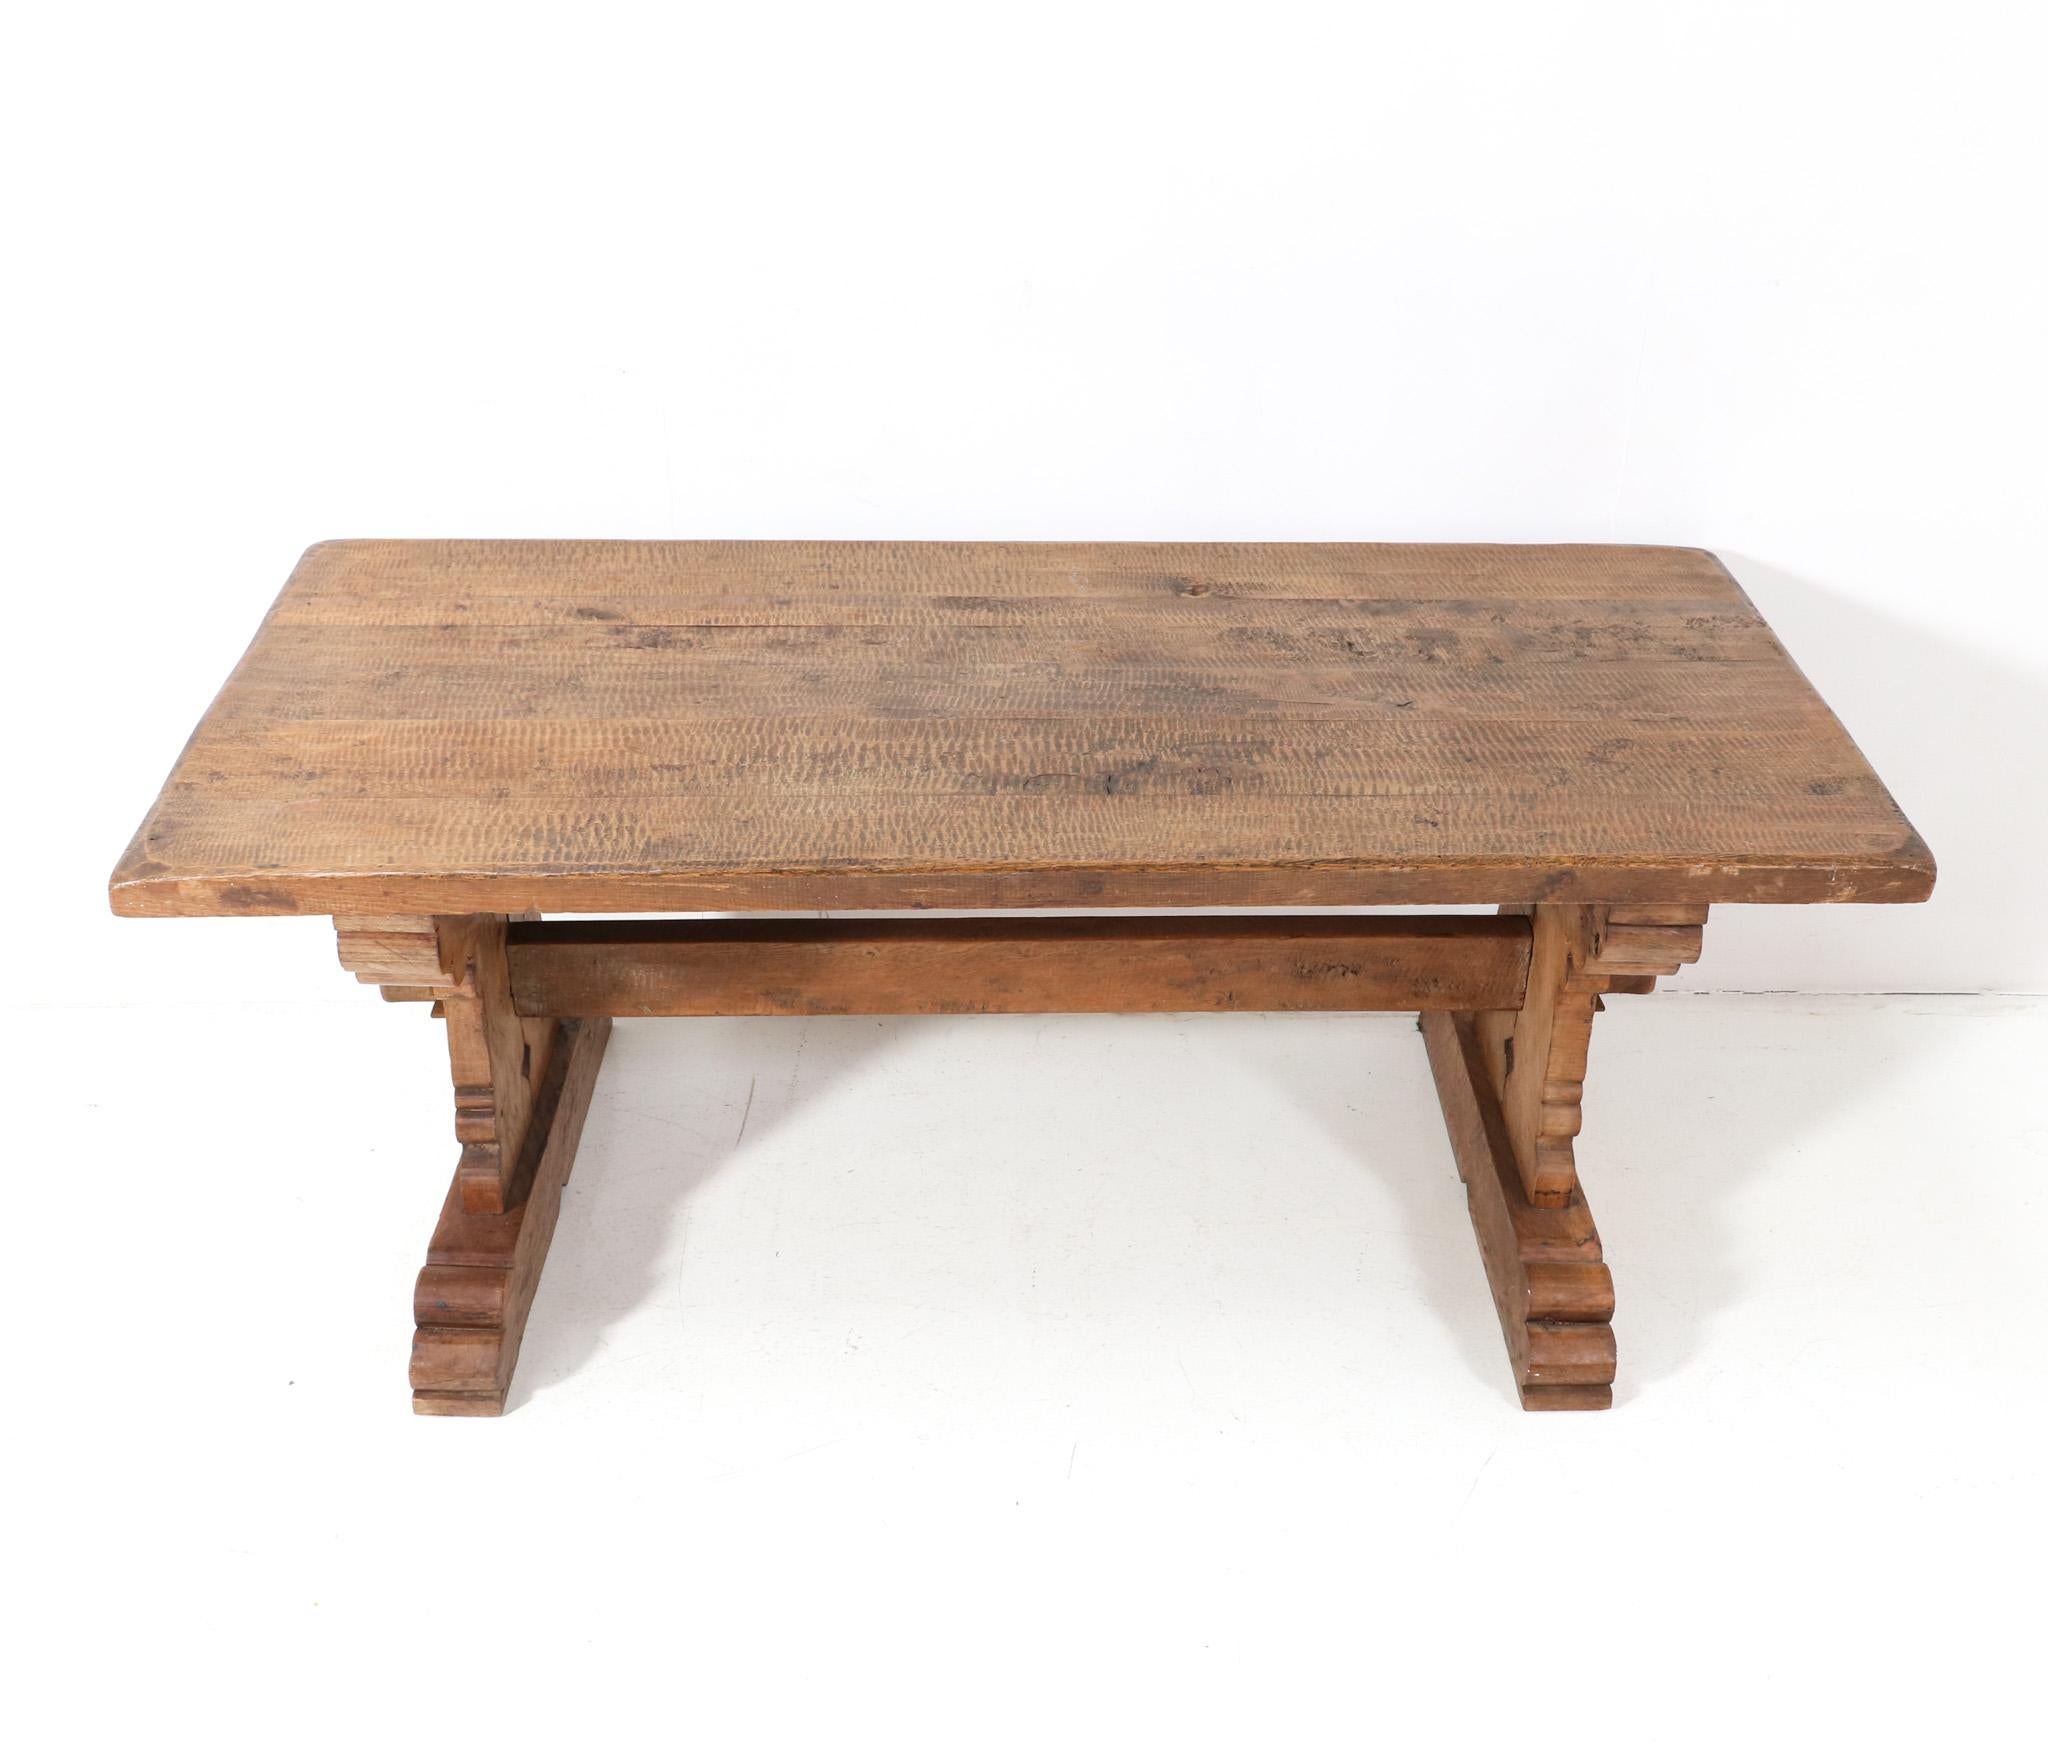 Oak Brutalist Dining Room Table or Refectory Table, 1970s For Sale 1